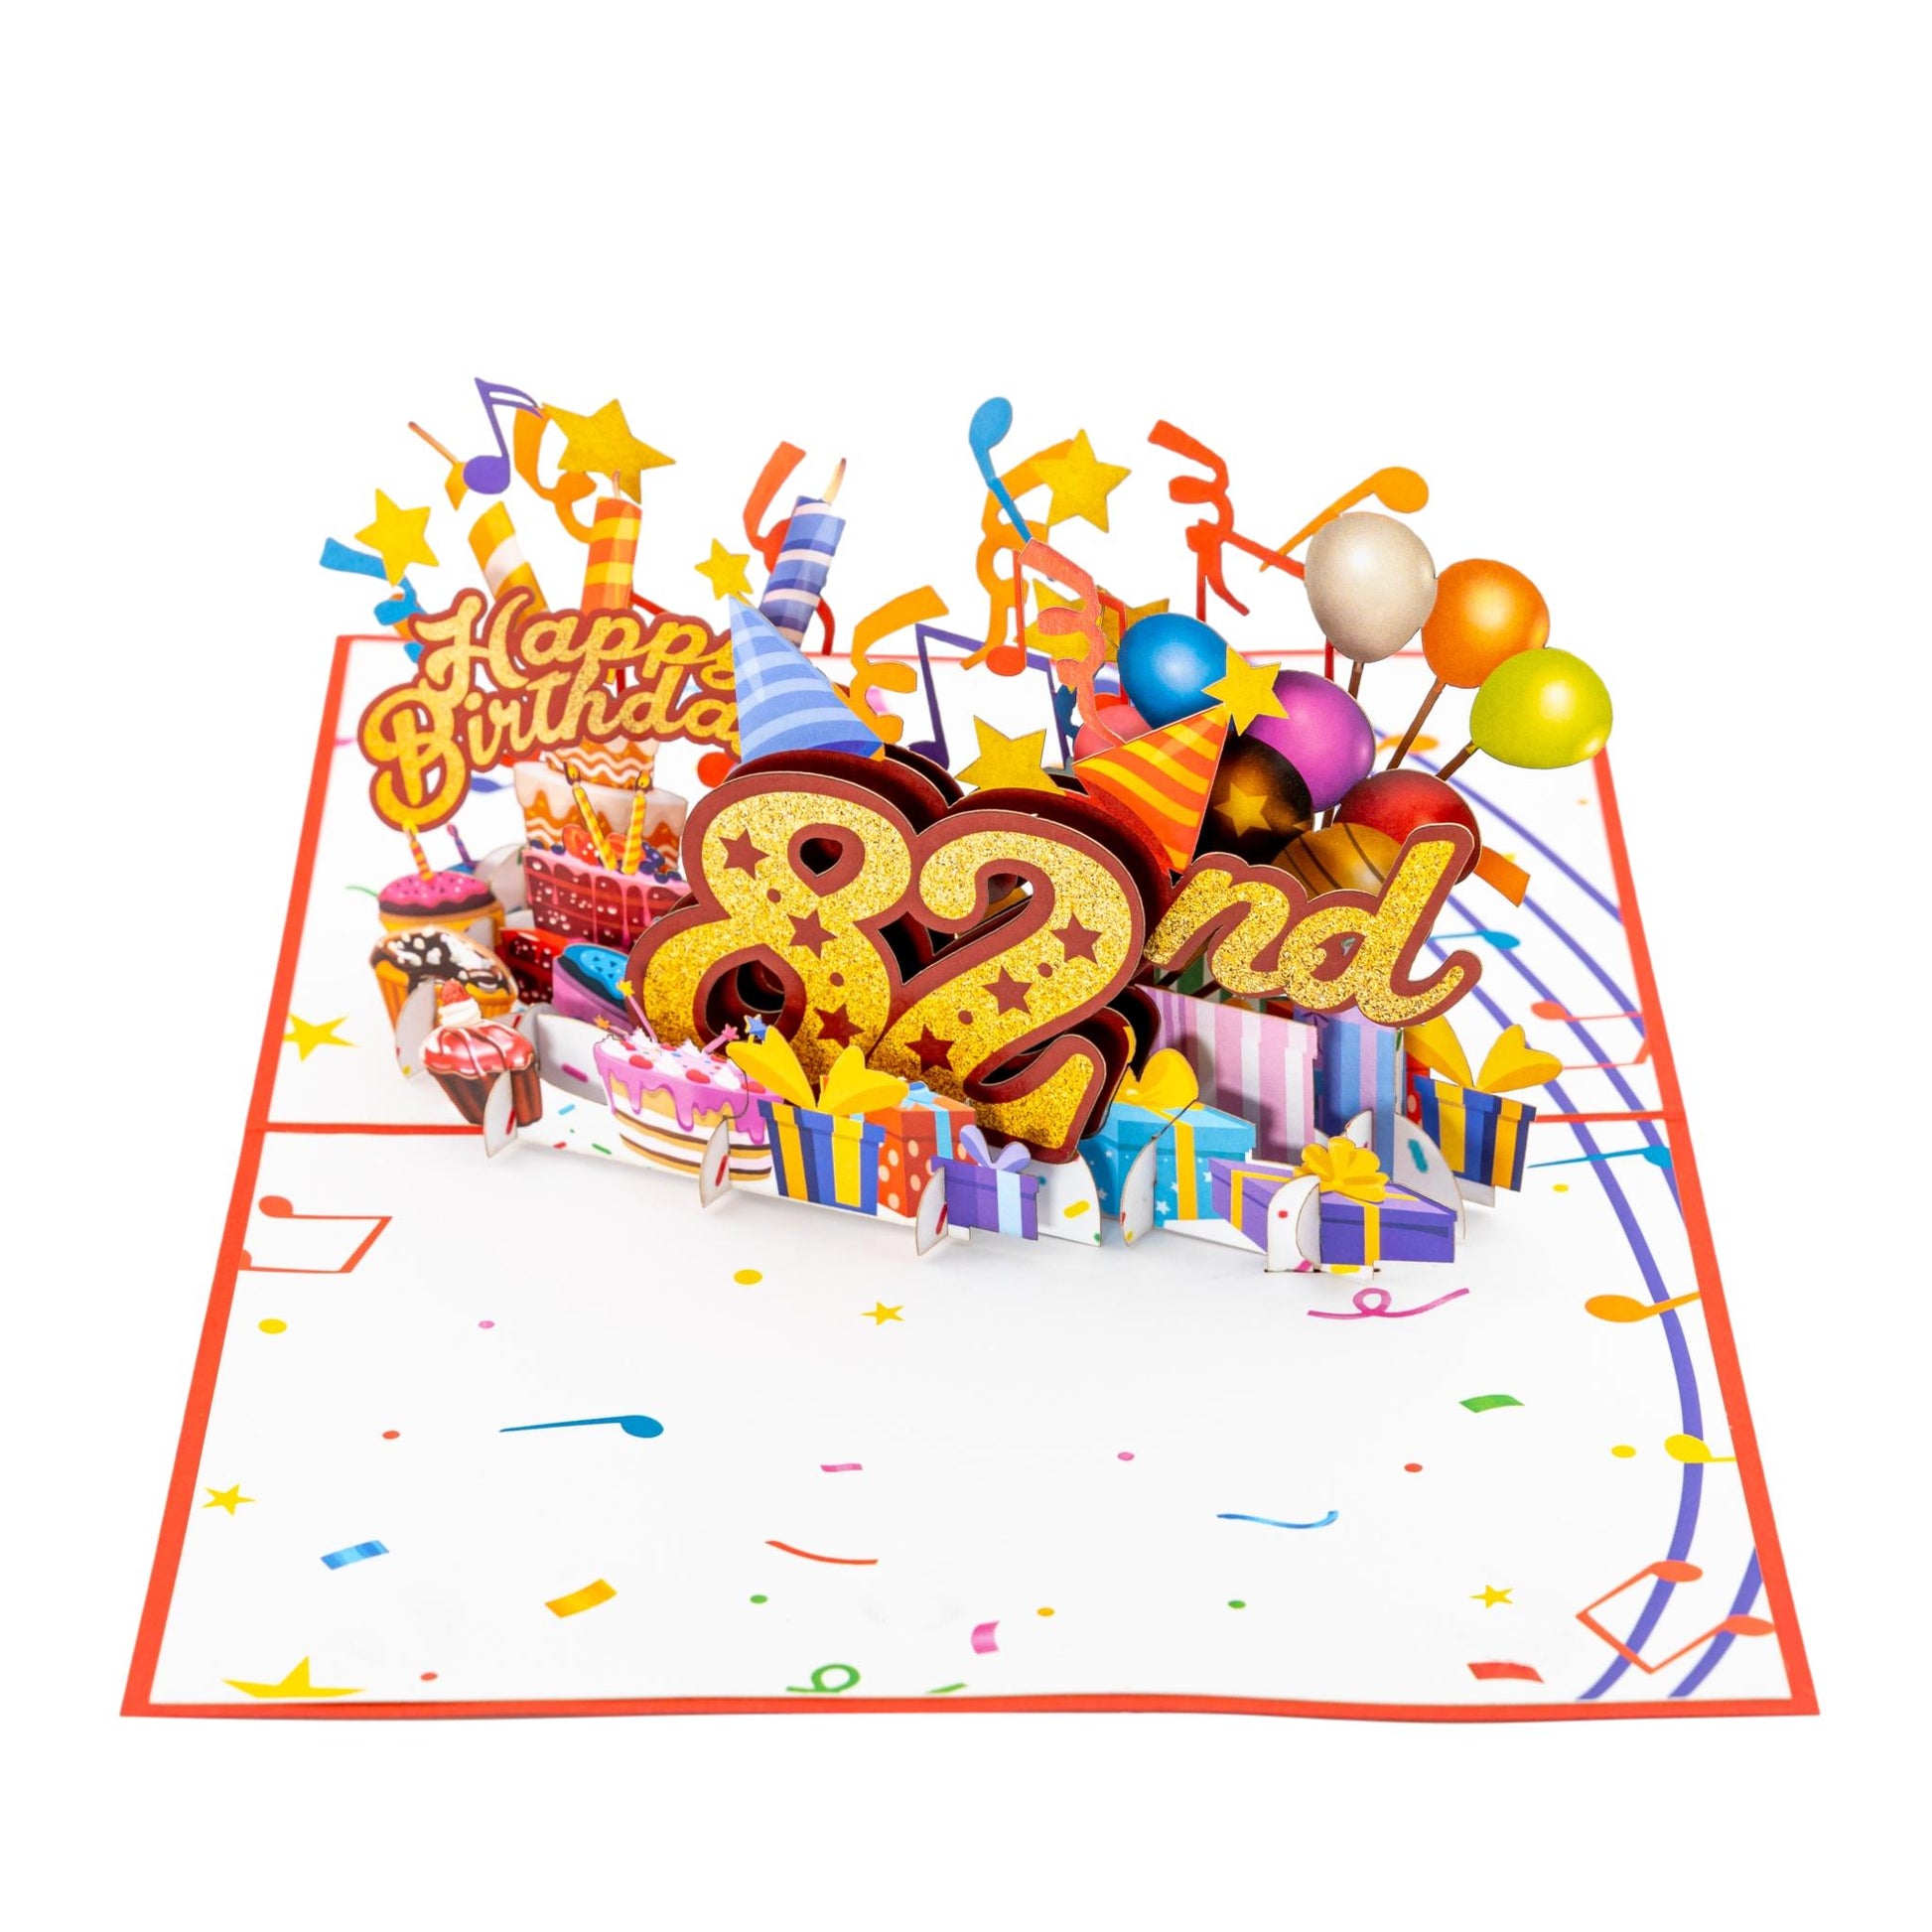 Happy 82nd Red Birthday 3D Pop Up Greeting Card - Happy Birthday - iGifts And Cards